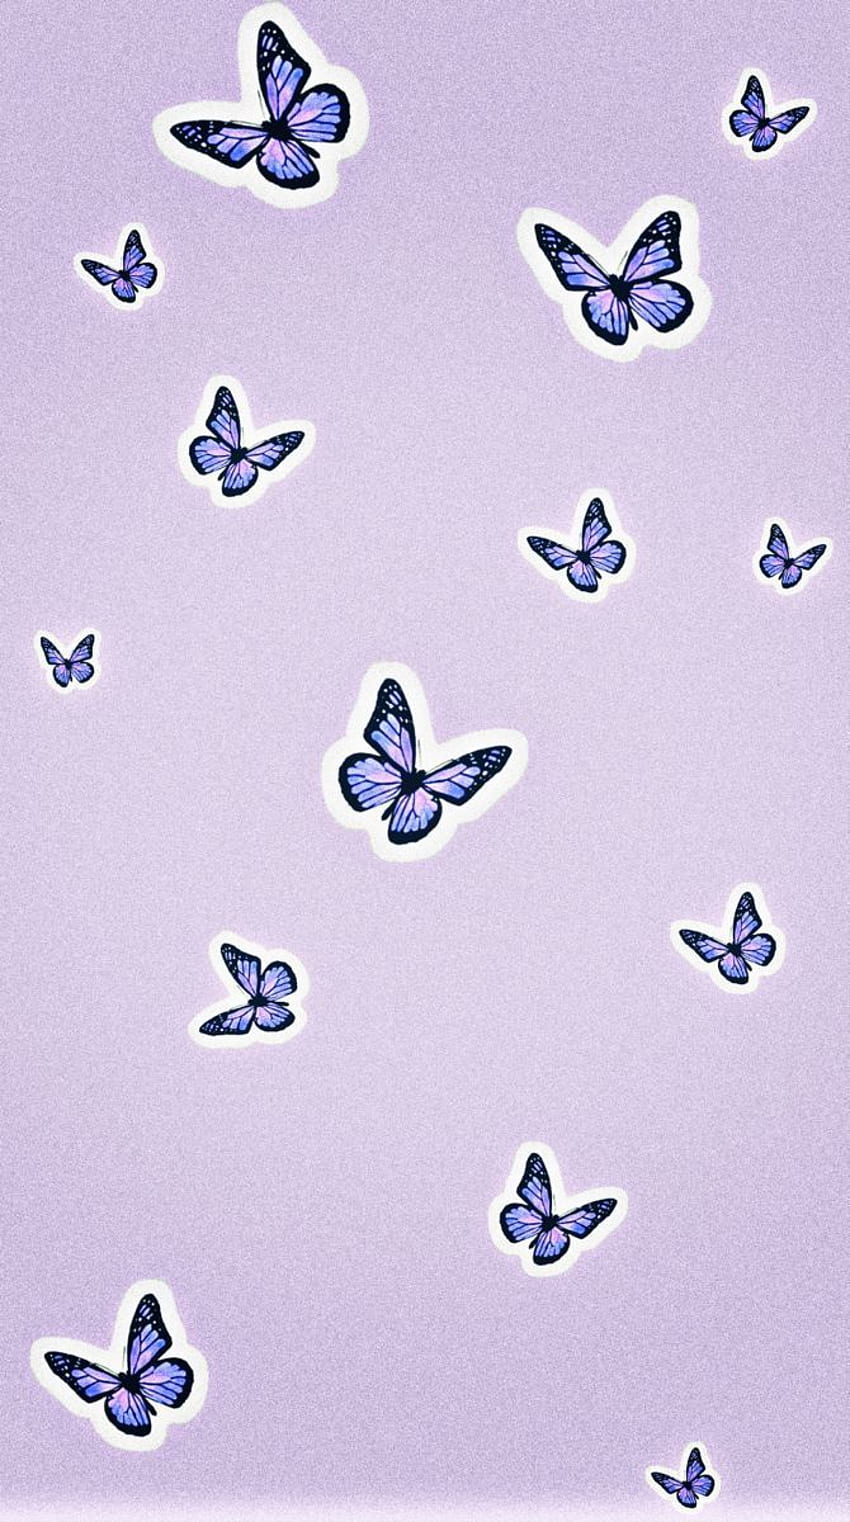 Pastel Butterfly Wallpaper Images  Free Download on Freepik